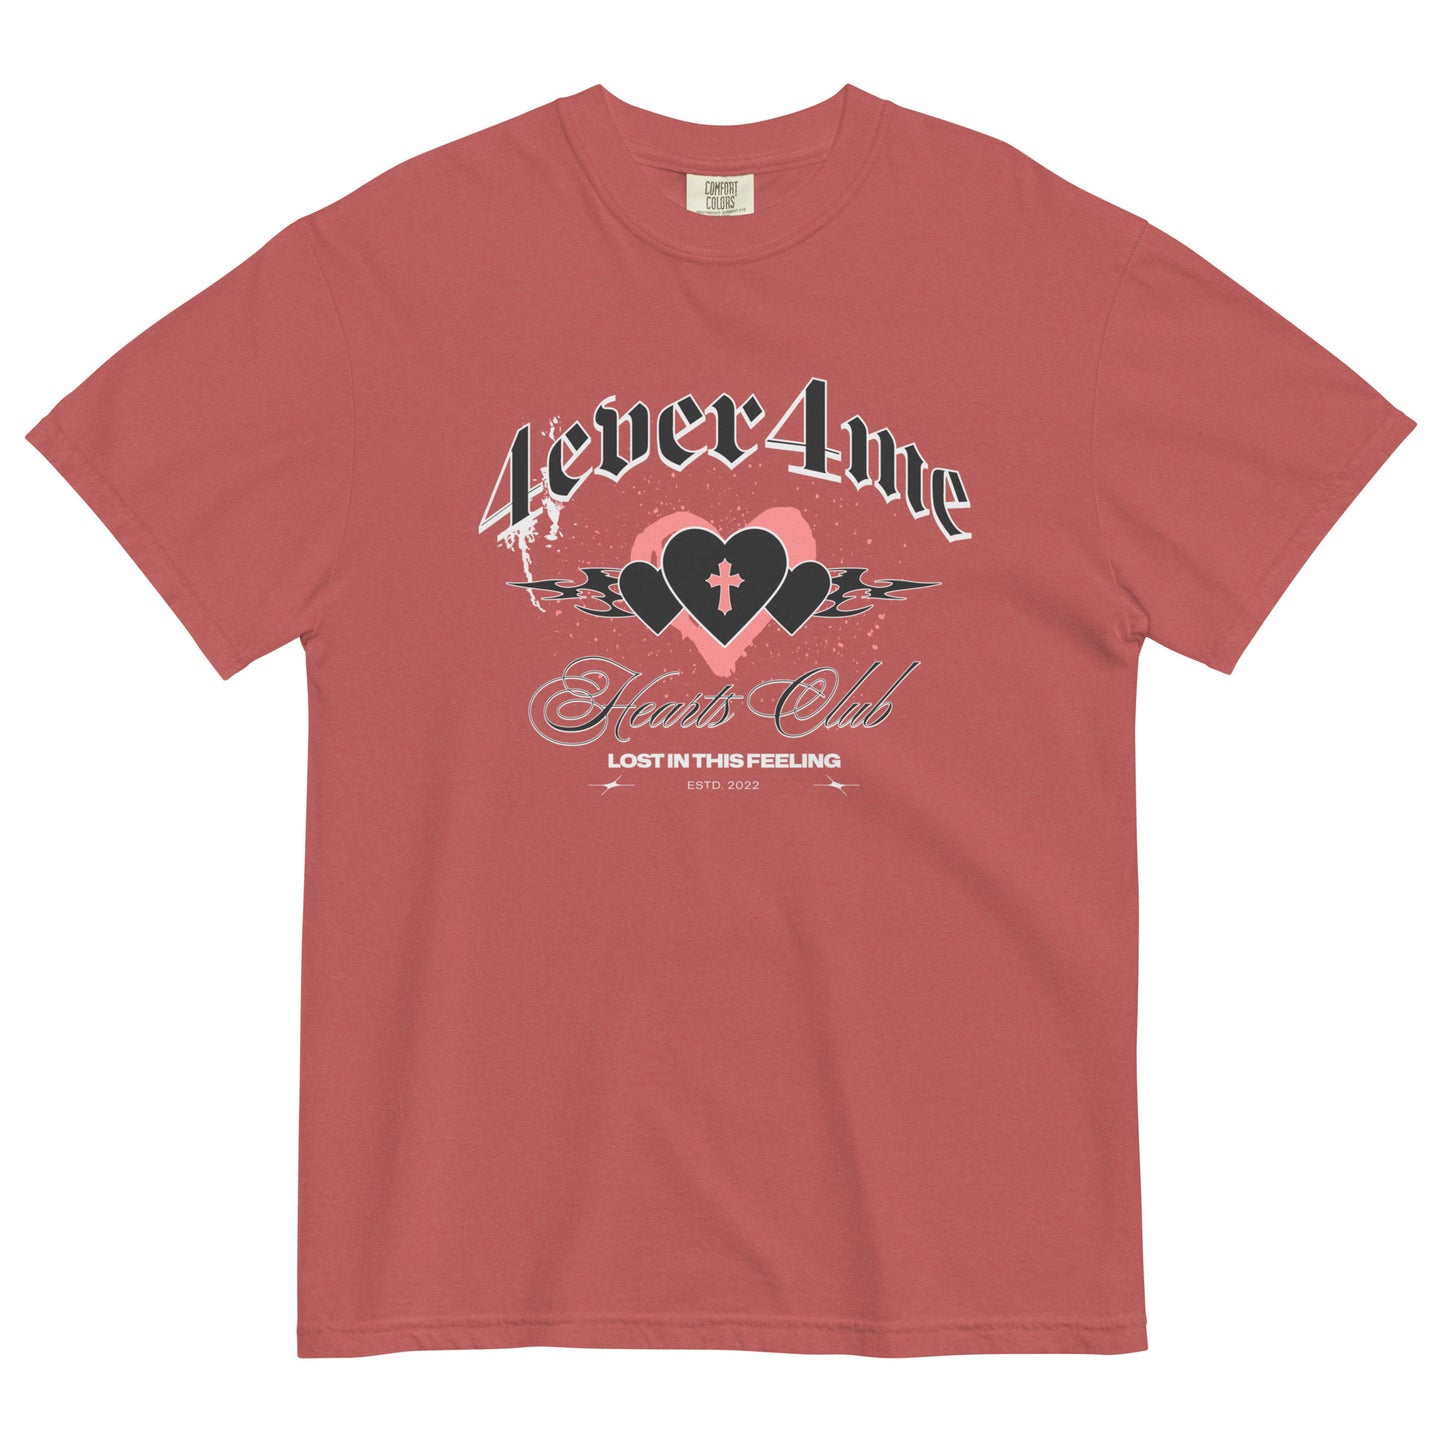 4EVER4ME GRAPHIC TEE